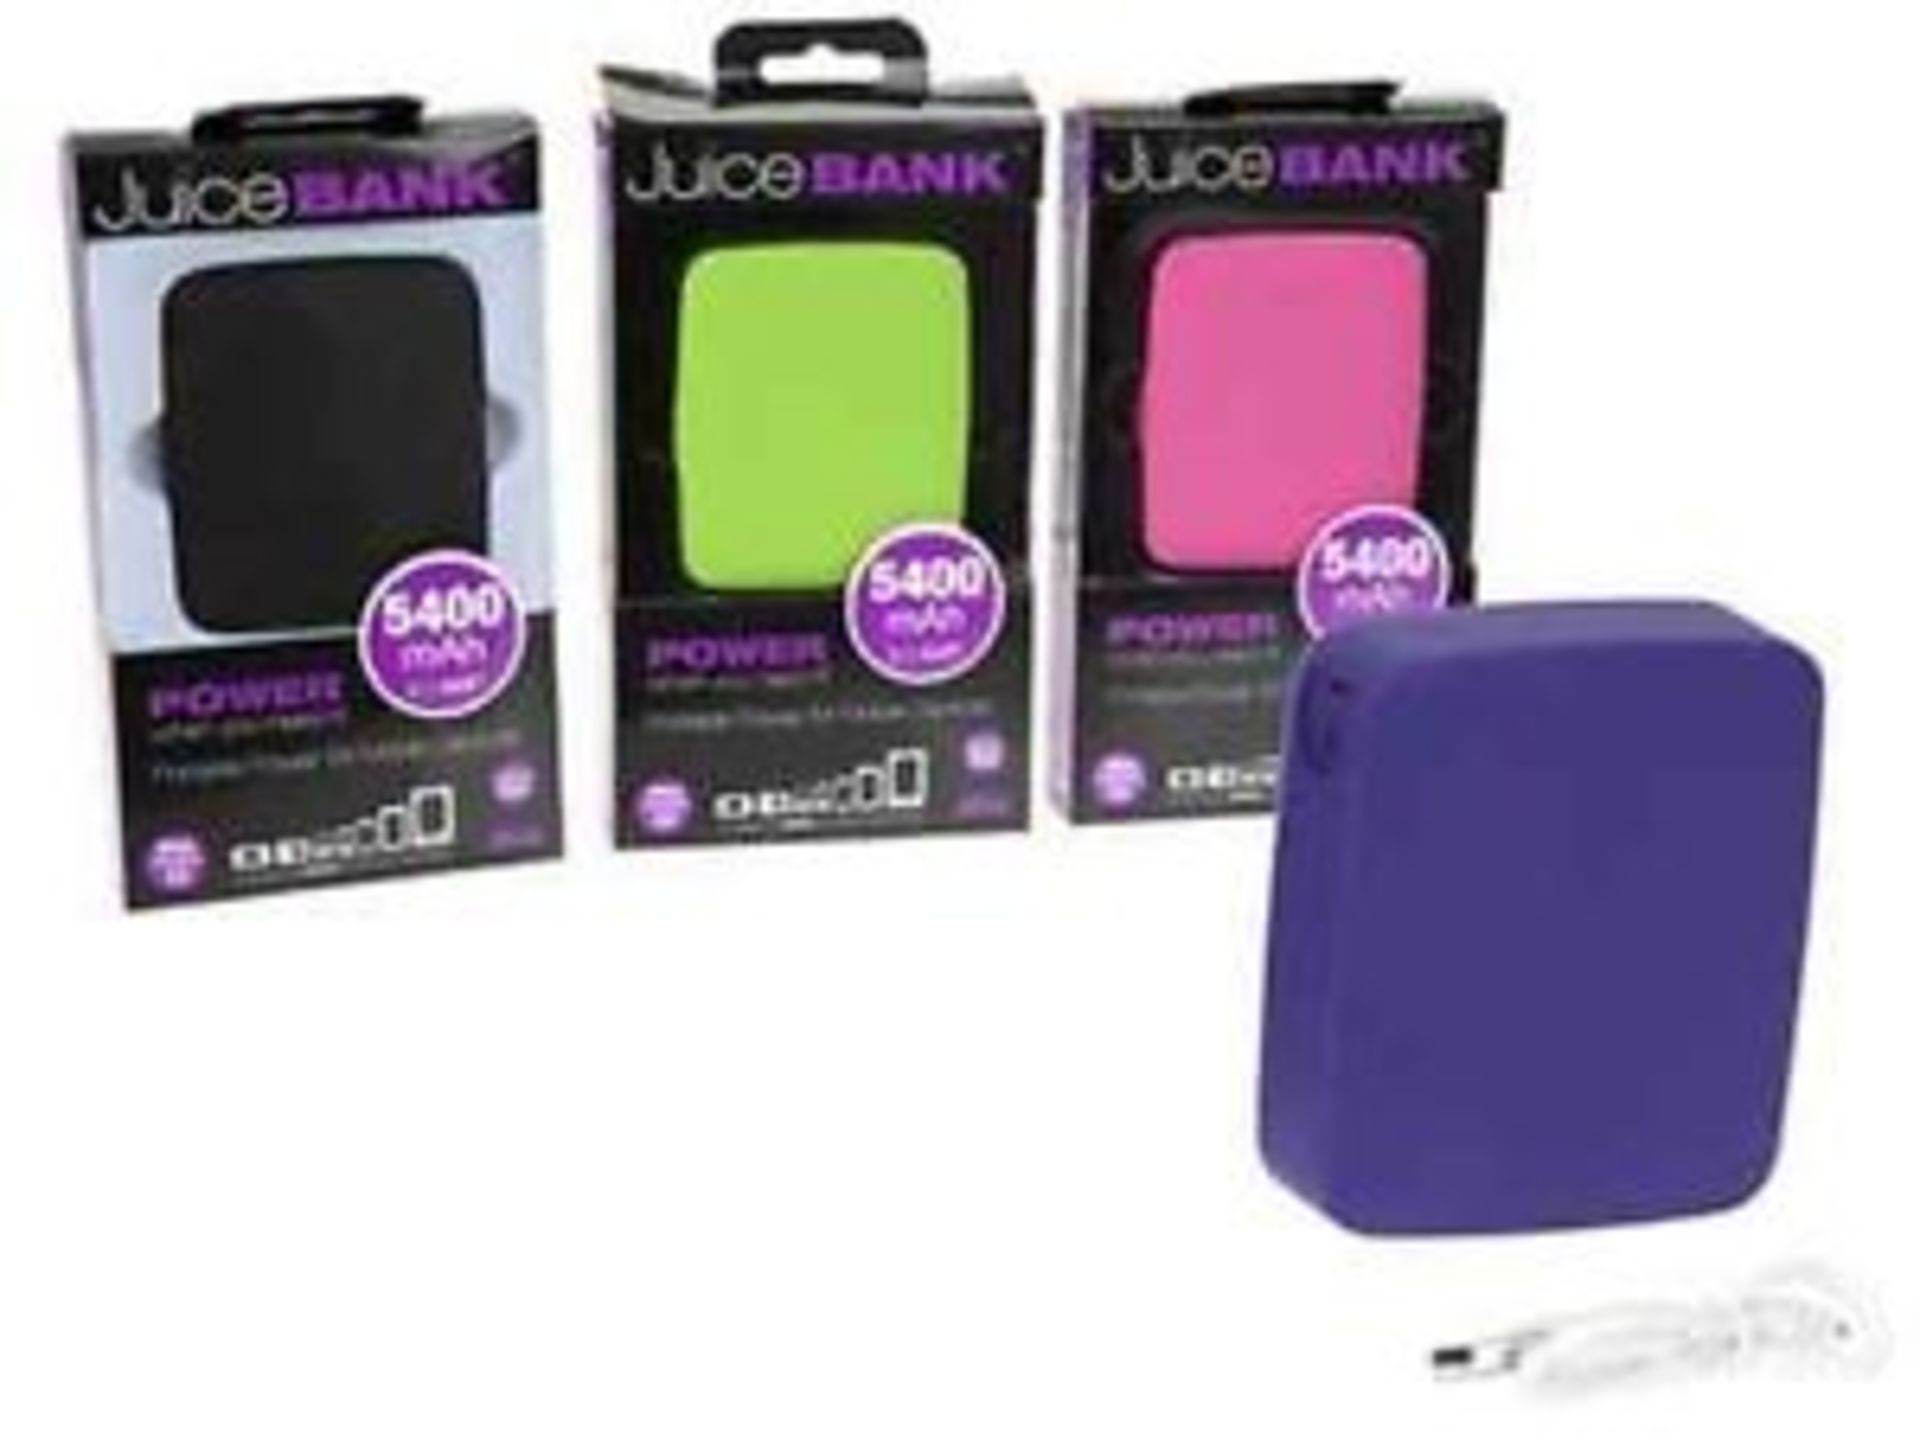 V Brand New Juice Bank 5400mAmp portable Power For Mobile Devices With Built In Torch SRP11.99 -